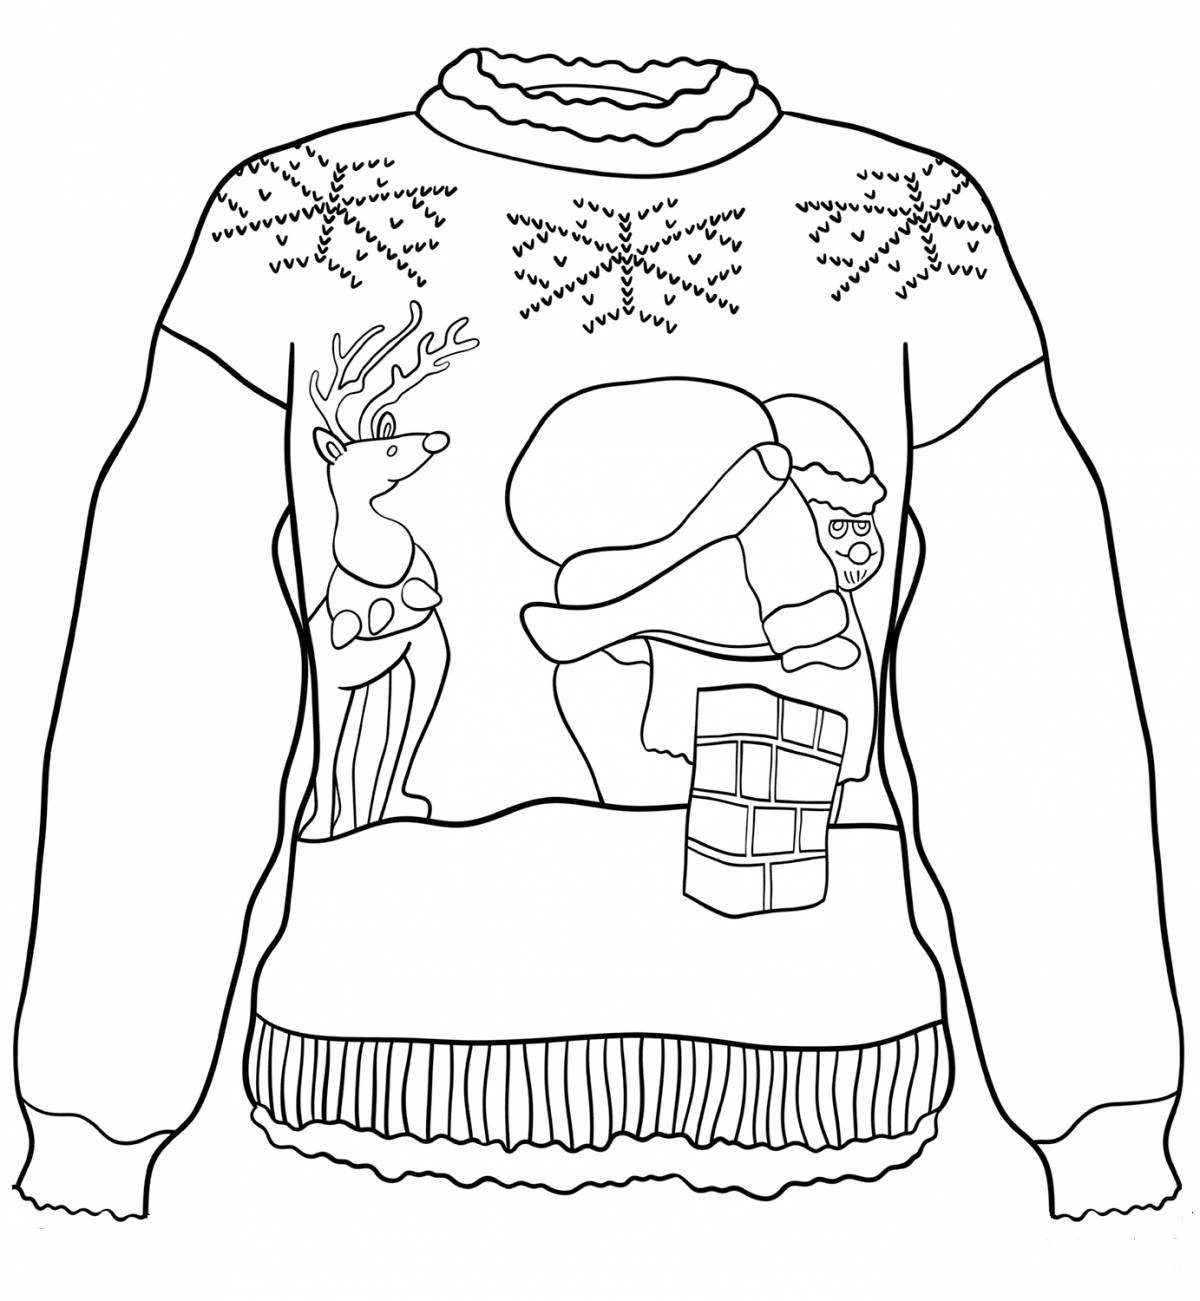 Colouring fabulous jacket for juniors